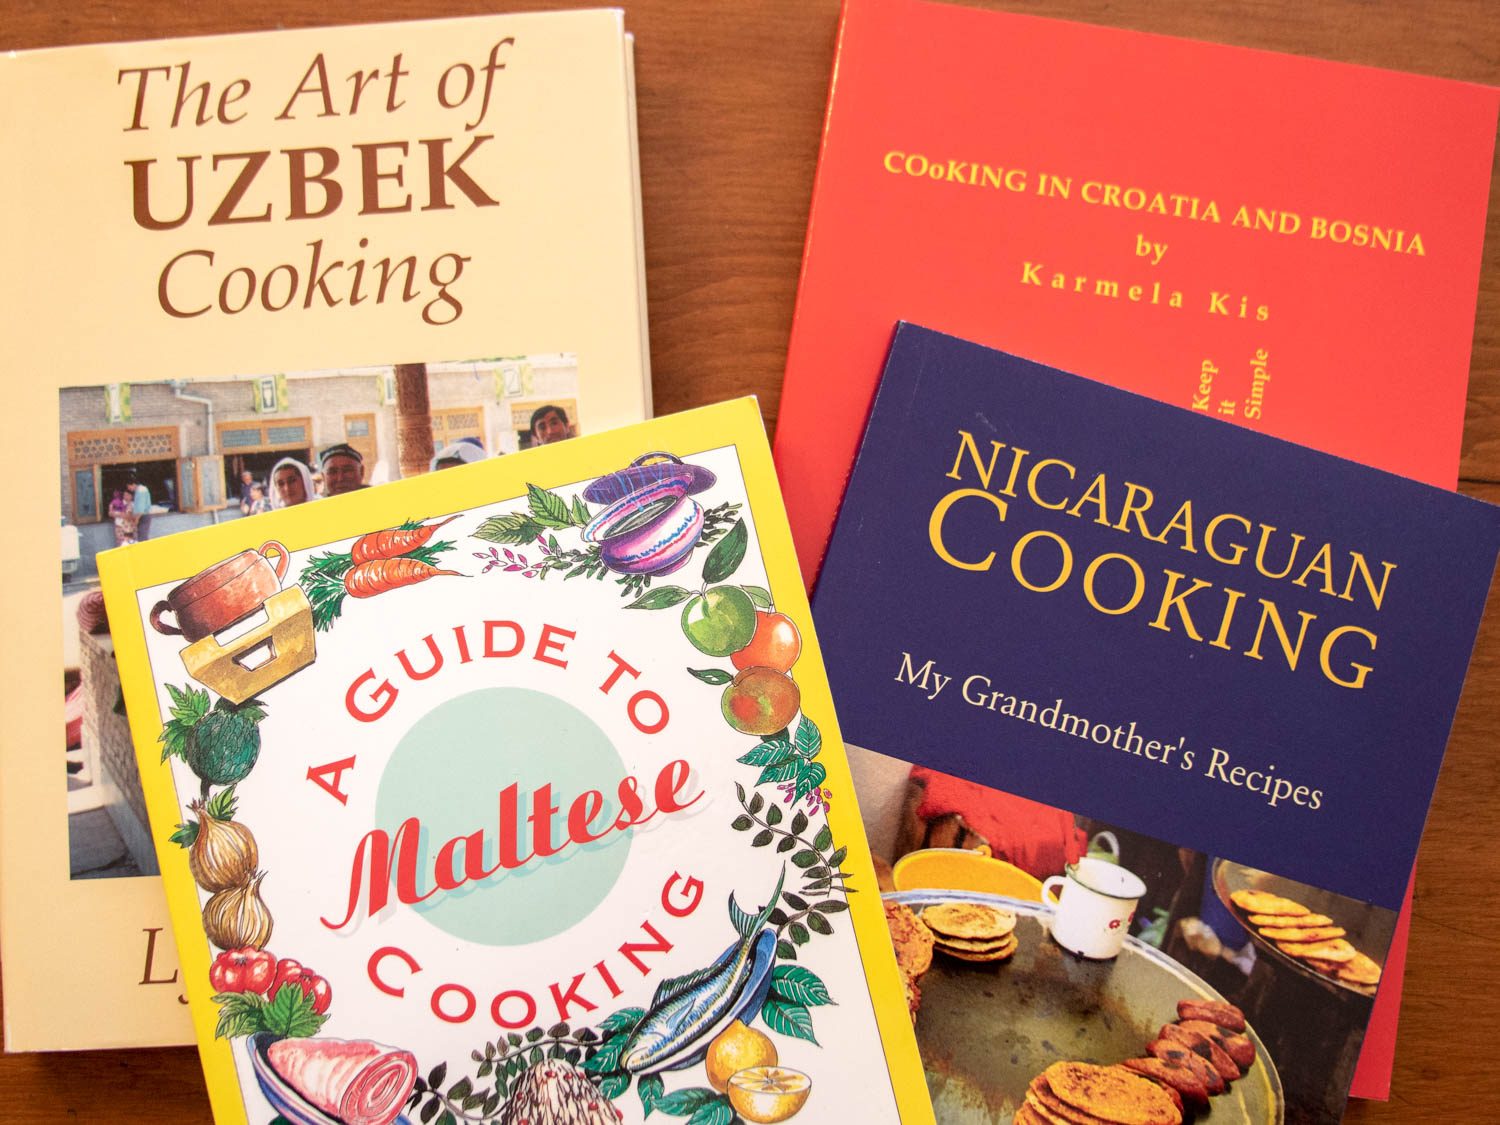 My cooking book. Art of Cookery книга. Cook book. Book about Cooking. Eat this book! Baking.